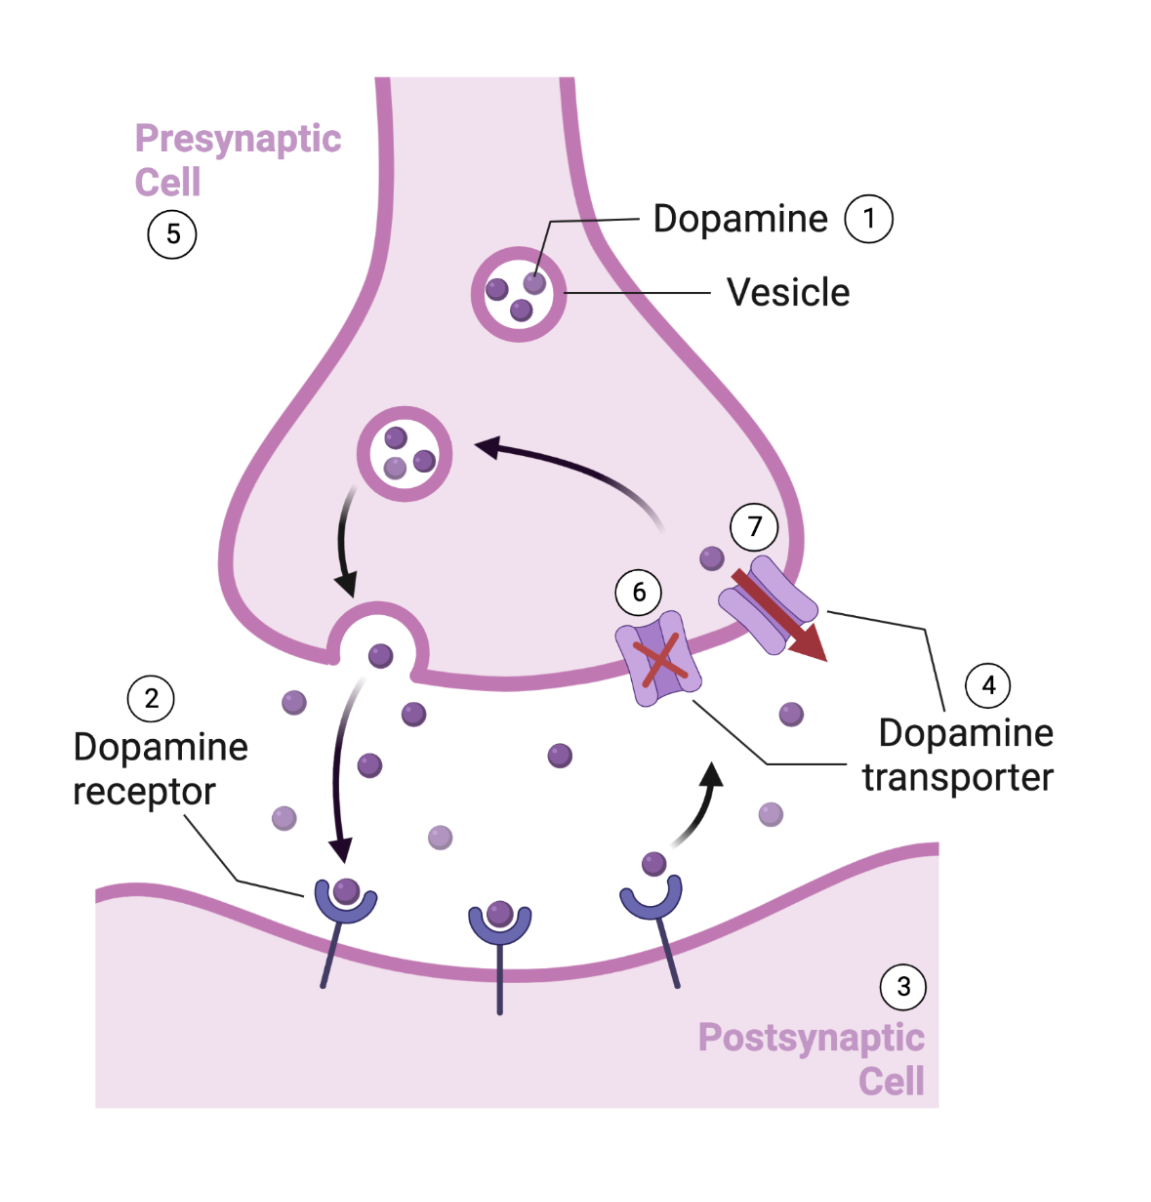 A dopamine synapse is shown with each of the seven steps above labeled, from dopamine release through dopamine reuptake via transporters. Some drugs like cocaine and methamphetamine can alter the function of those transporters.